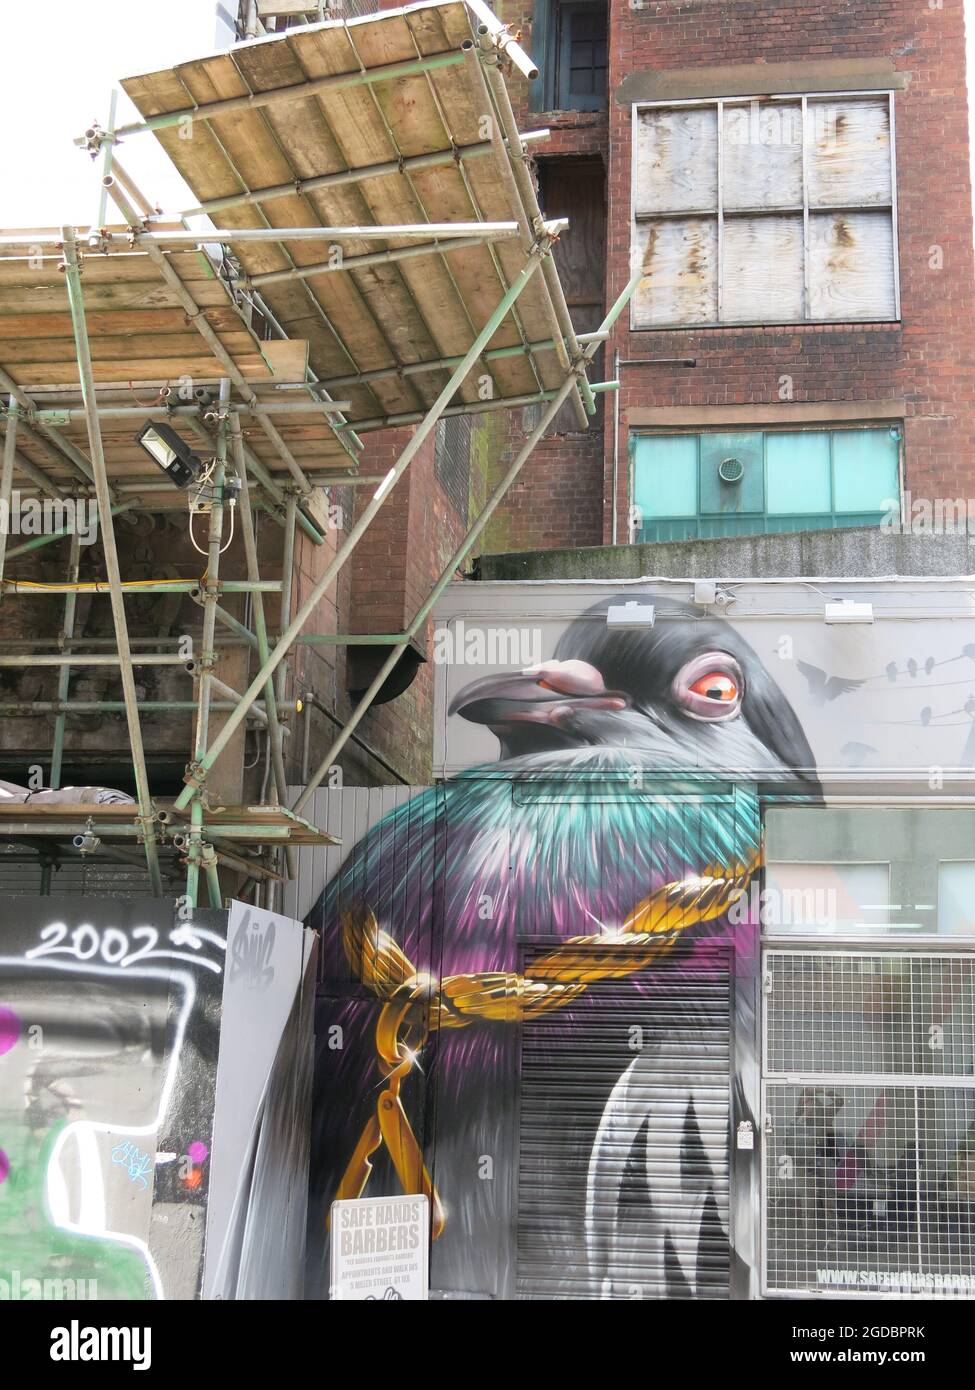 There's a Glasgow Mural Trail to follow to admire all the street art that's being used to revitalise the city centre, including this colourful bird. Stock Photo